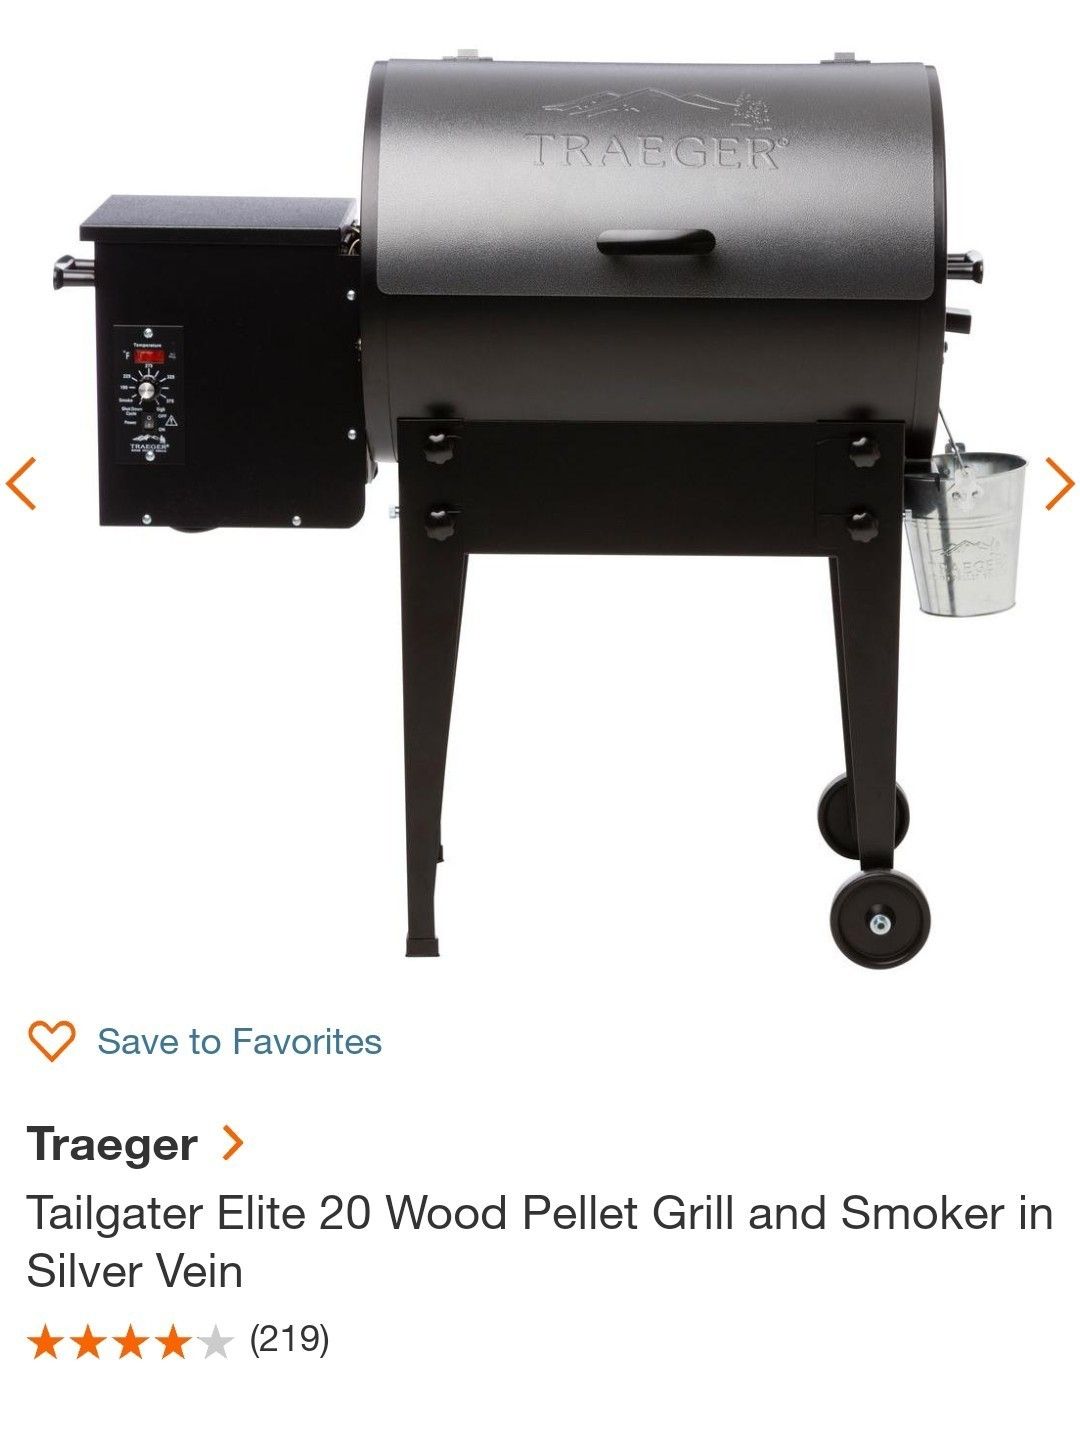 Traeger Tailgater Elite 20 Wood Pellet Grill and Smoker